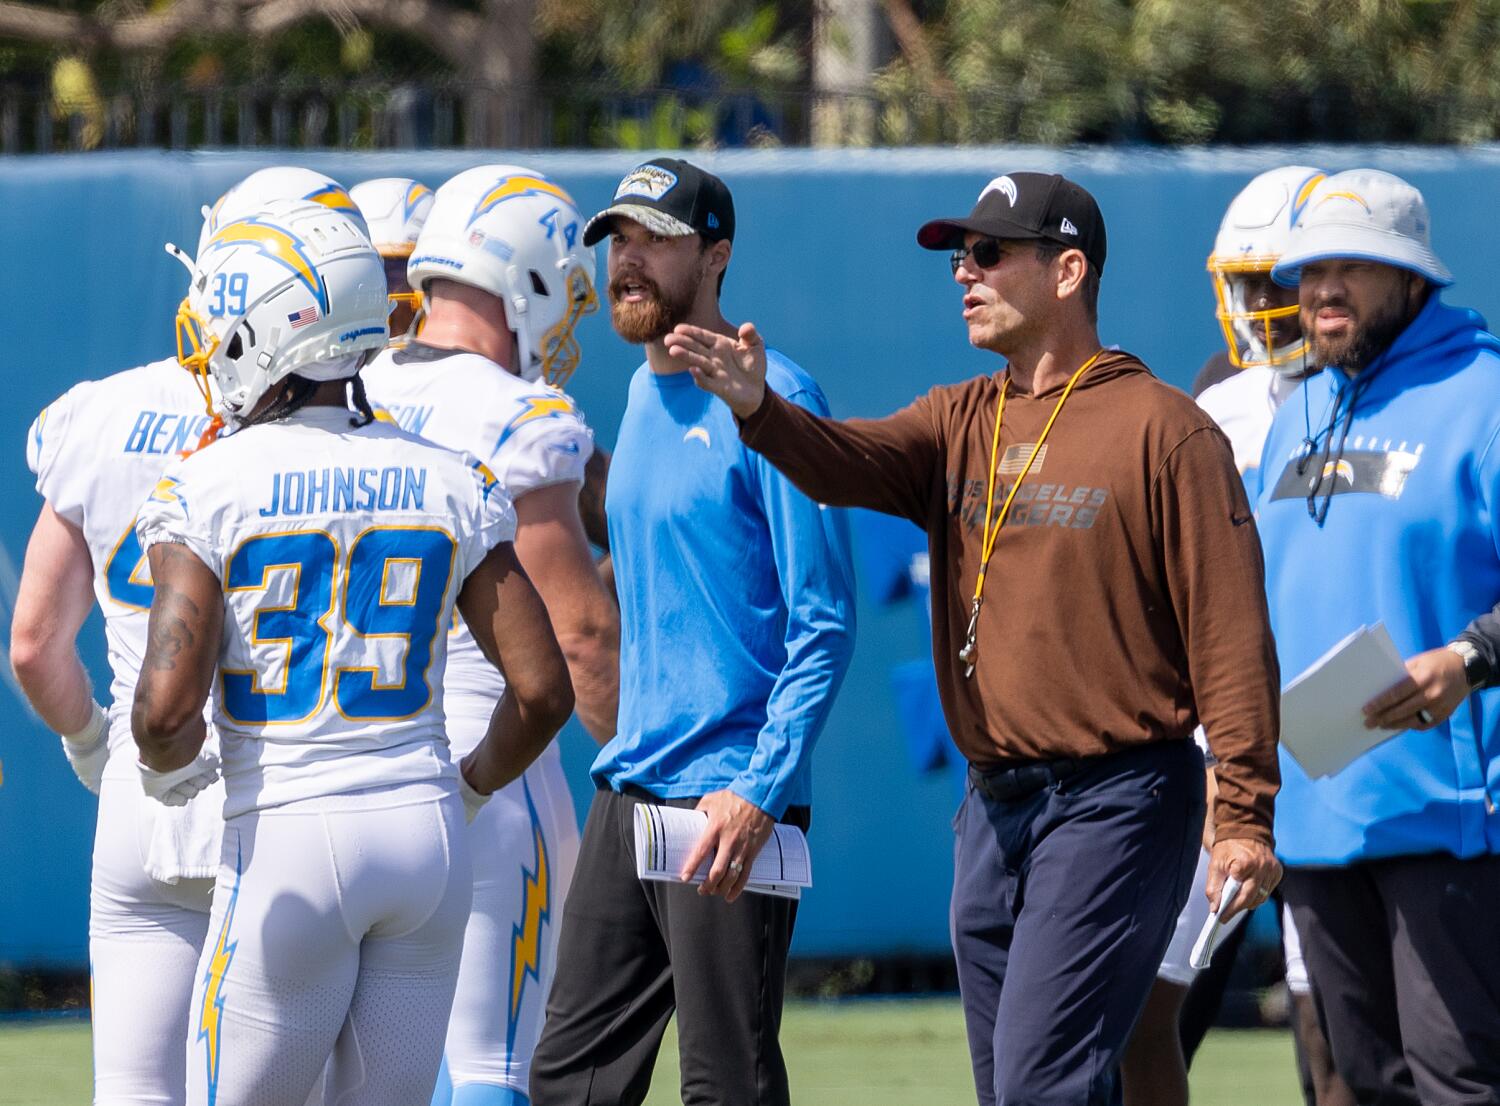 With expectations low, Chargers have high hopes they'll answer big questions at camp